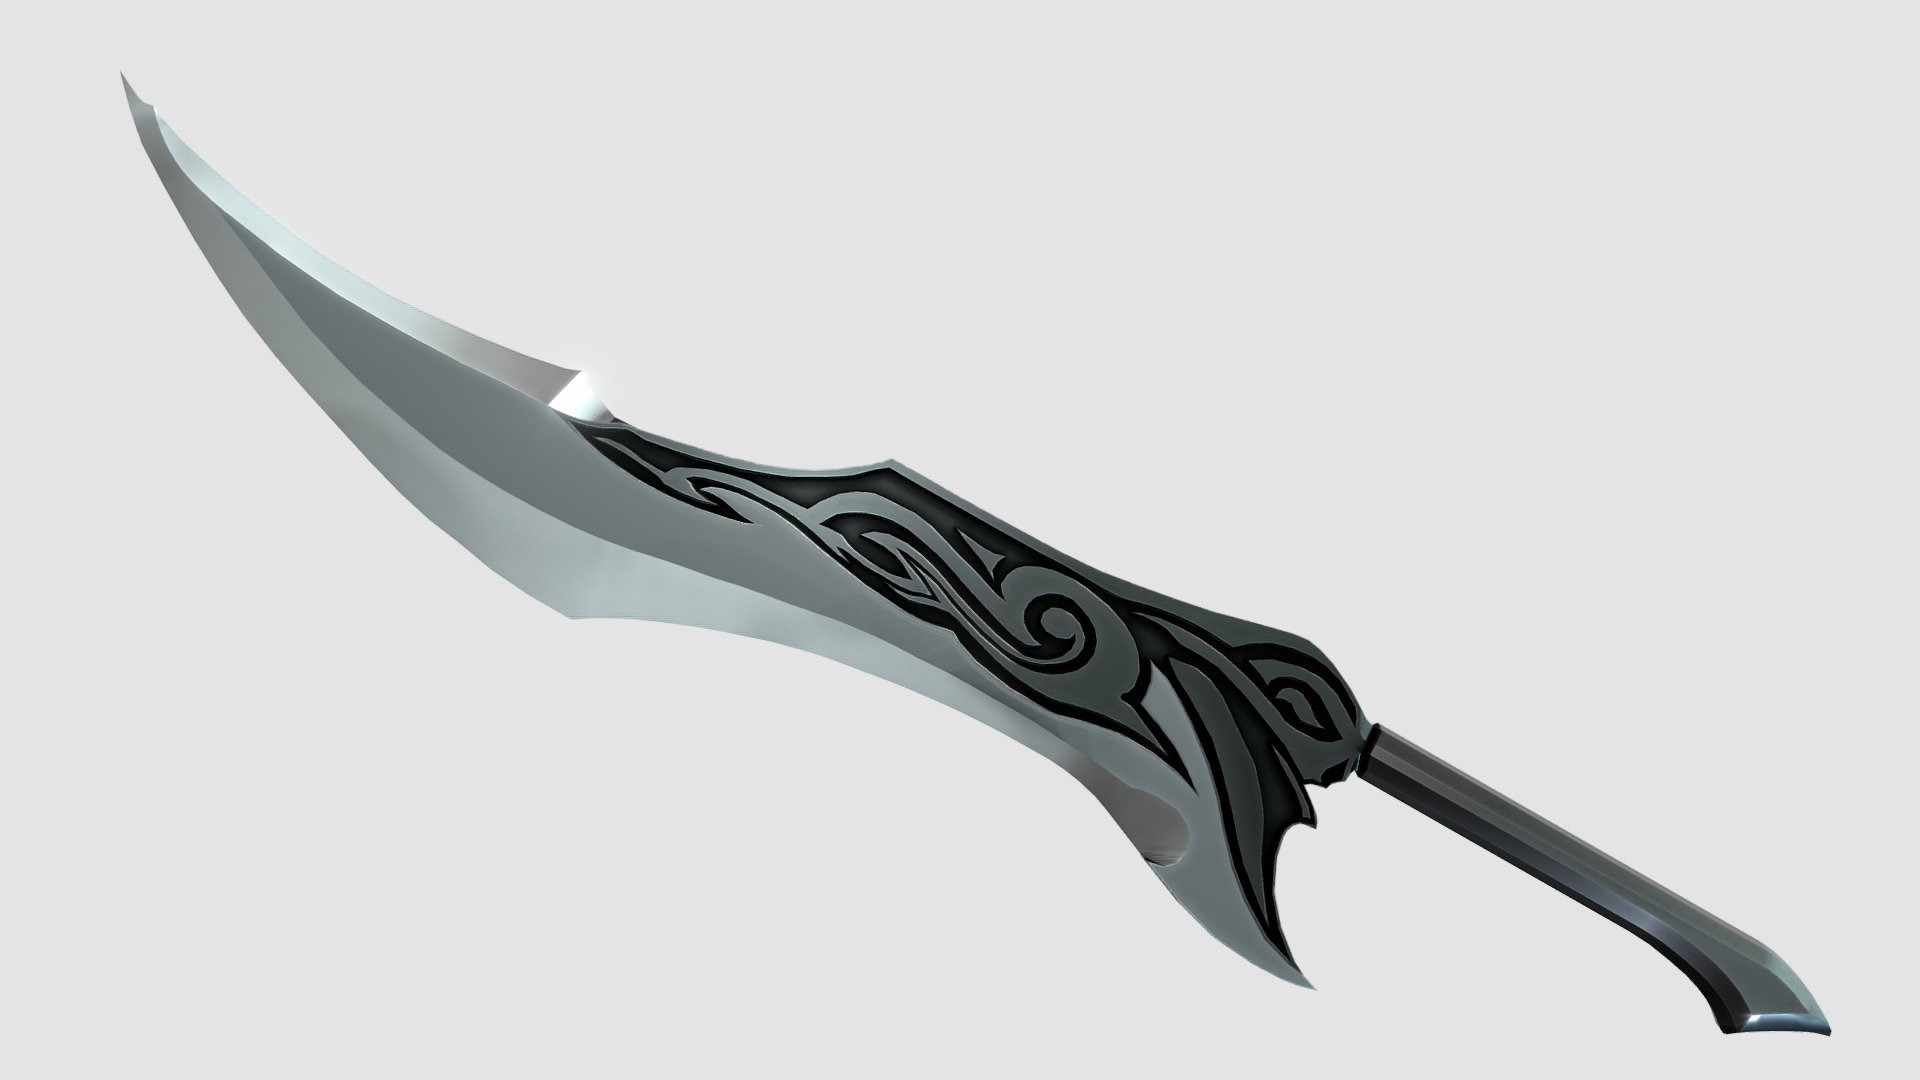 Check my profile for more of the same and follow me to see my future models, if you have any questions comment below or dm me.

About the model: This a simple and elegant one-handed sword.

Topology: 100% tris

Performance: It performs very well in-game, it's a good looking lowpoly, the textures can be down-scaled from their original 4k resolution to 1k and it will still have great quality.

Textures: 4k textures of: Color, Metallic, Roughness, Ambient occlussion, Curvature, Thickness, Position.

UV: Unwraped and packed

Formats Included: FBX, OBJ, GLB, PLY, STL, USDC, X3D, DAE, ABC, BLEND 3d model